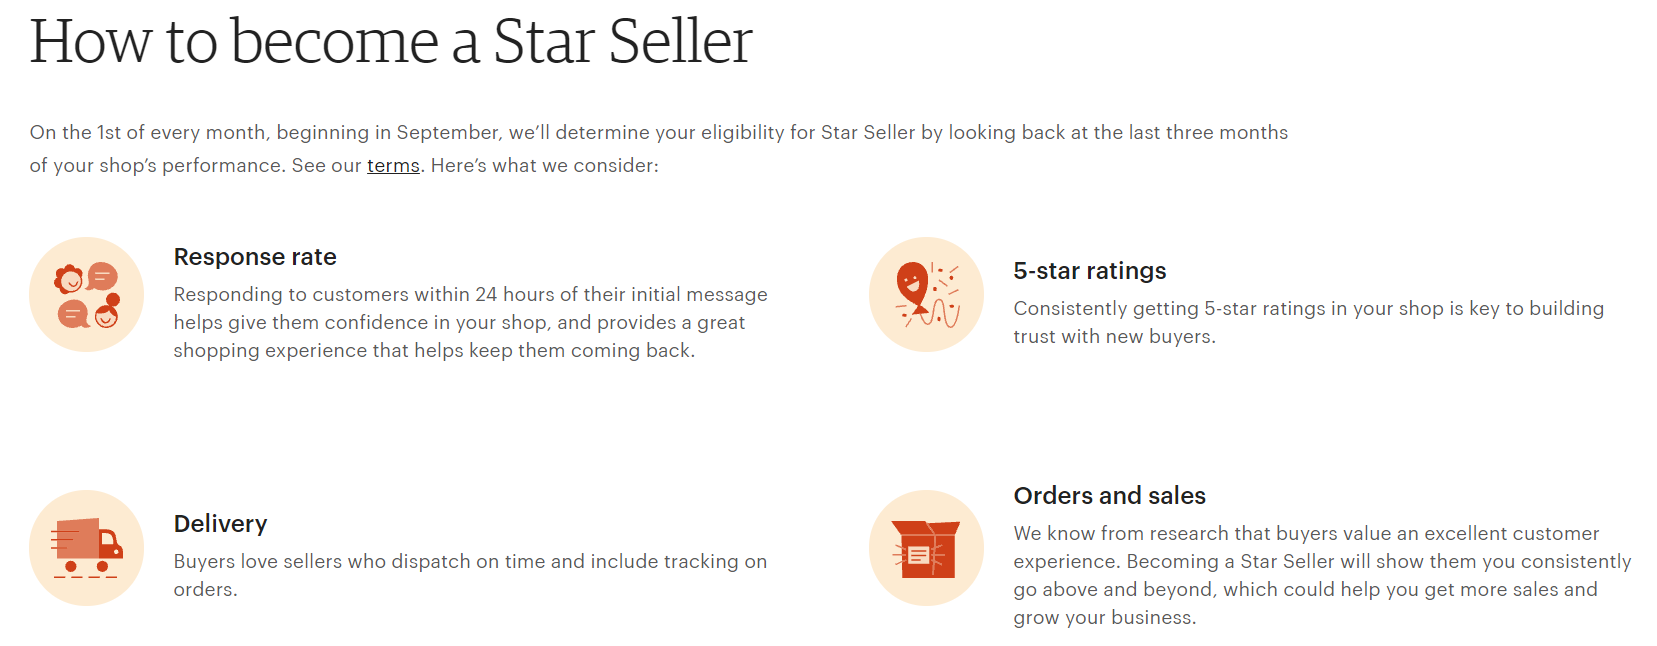 Etsy Star Seller:  Image showing Performance Criteria to be rated.